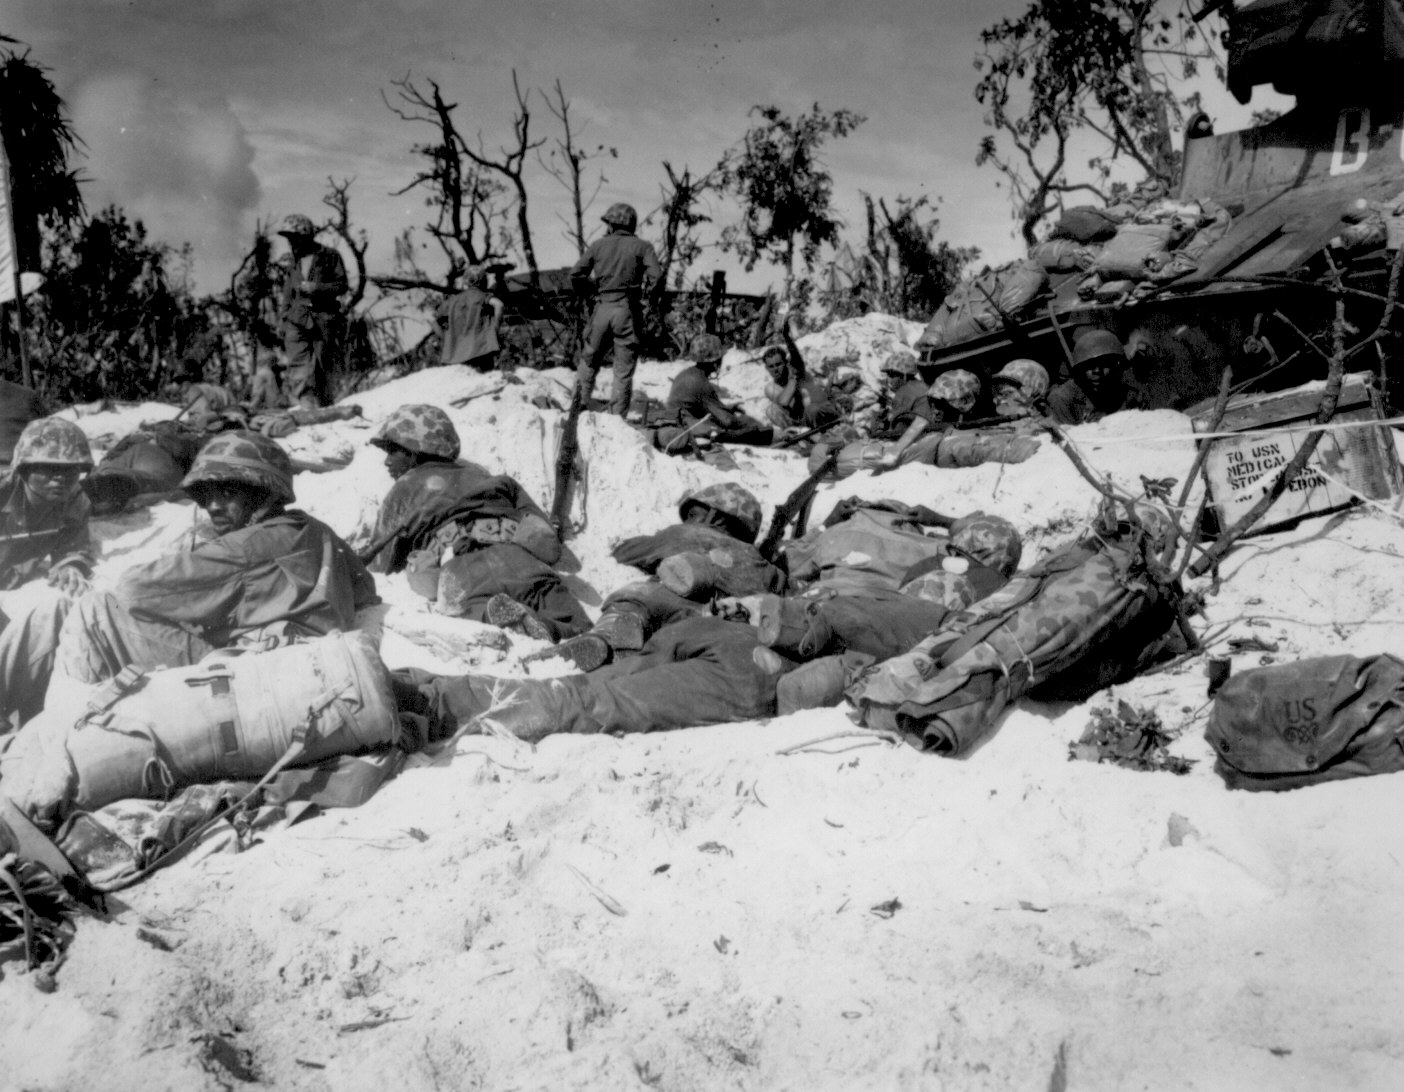 African-American US Marines resting during the campaign for Peleliu, Palau Islands, 15 Sep 1944